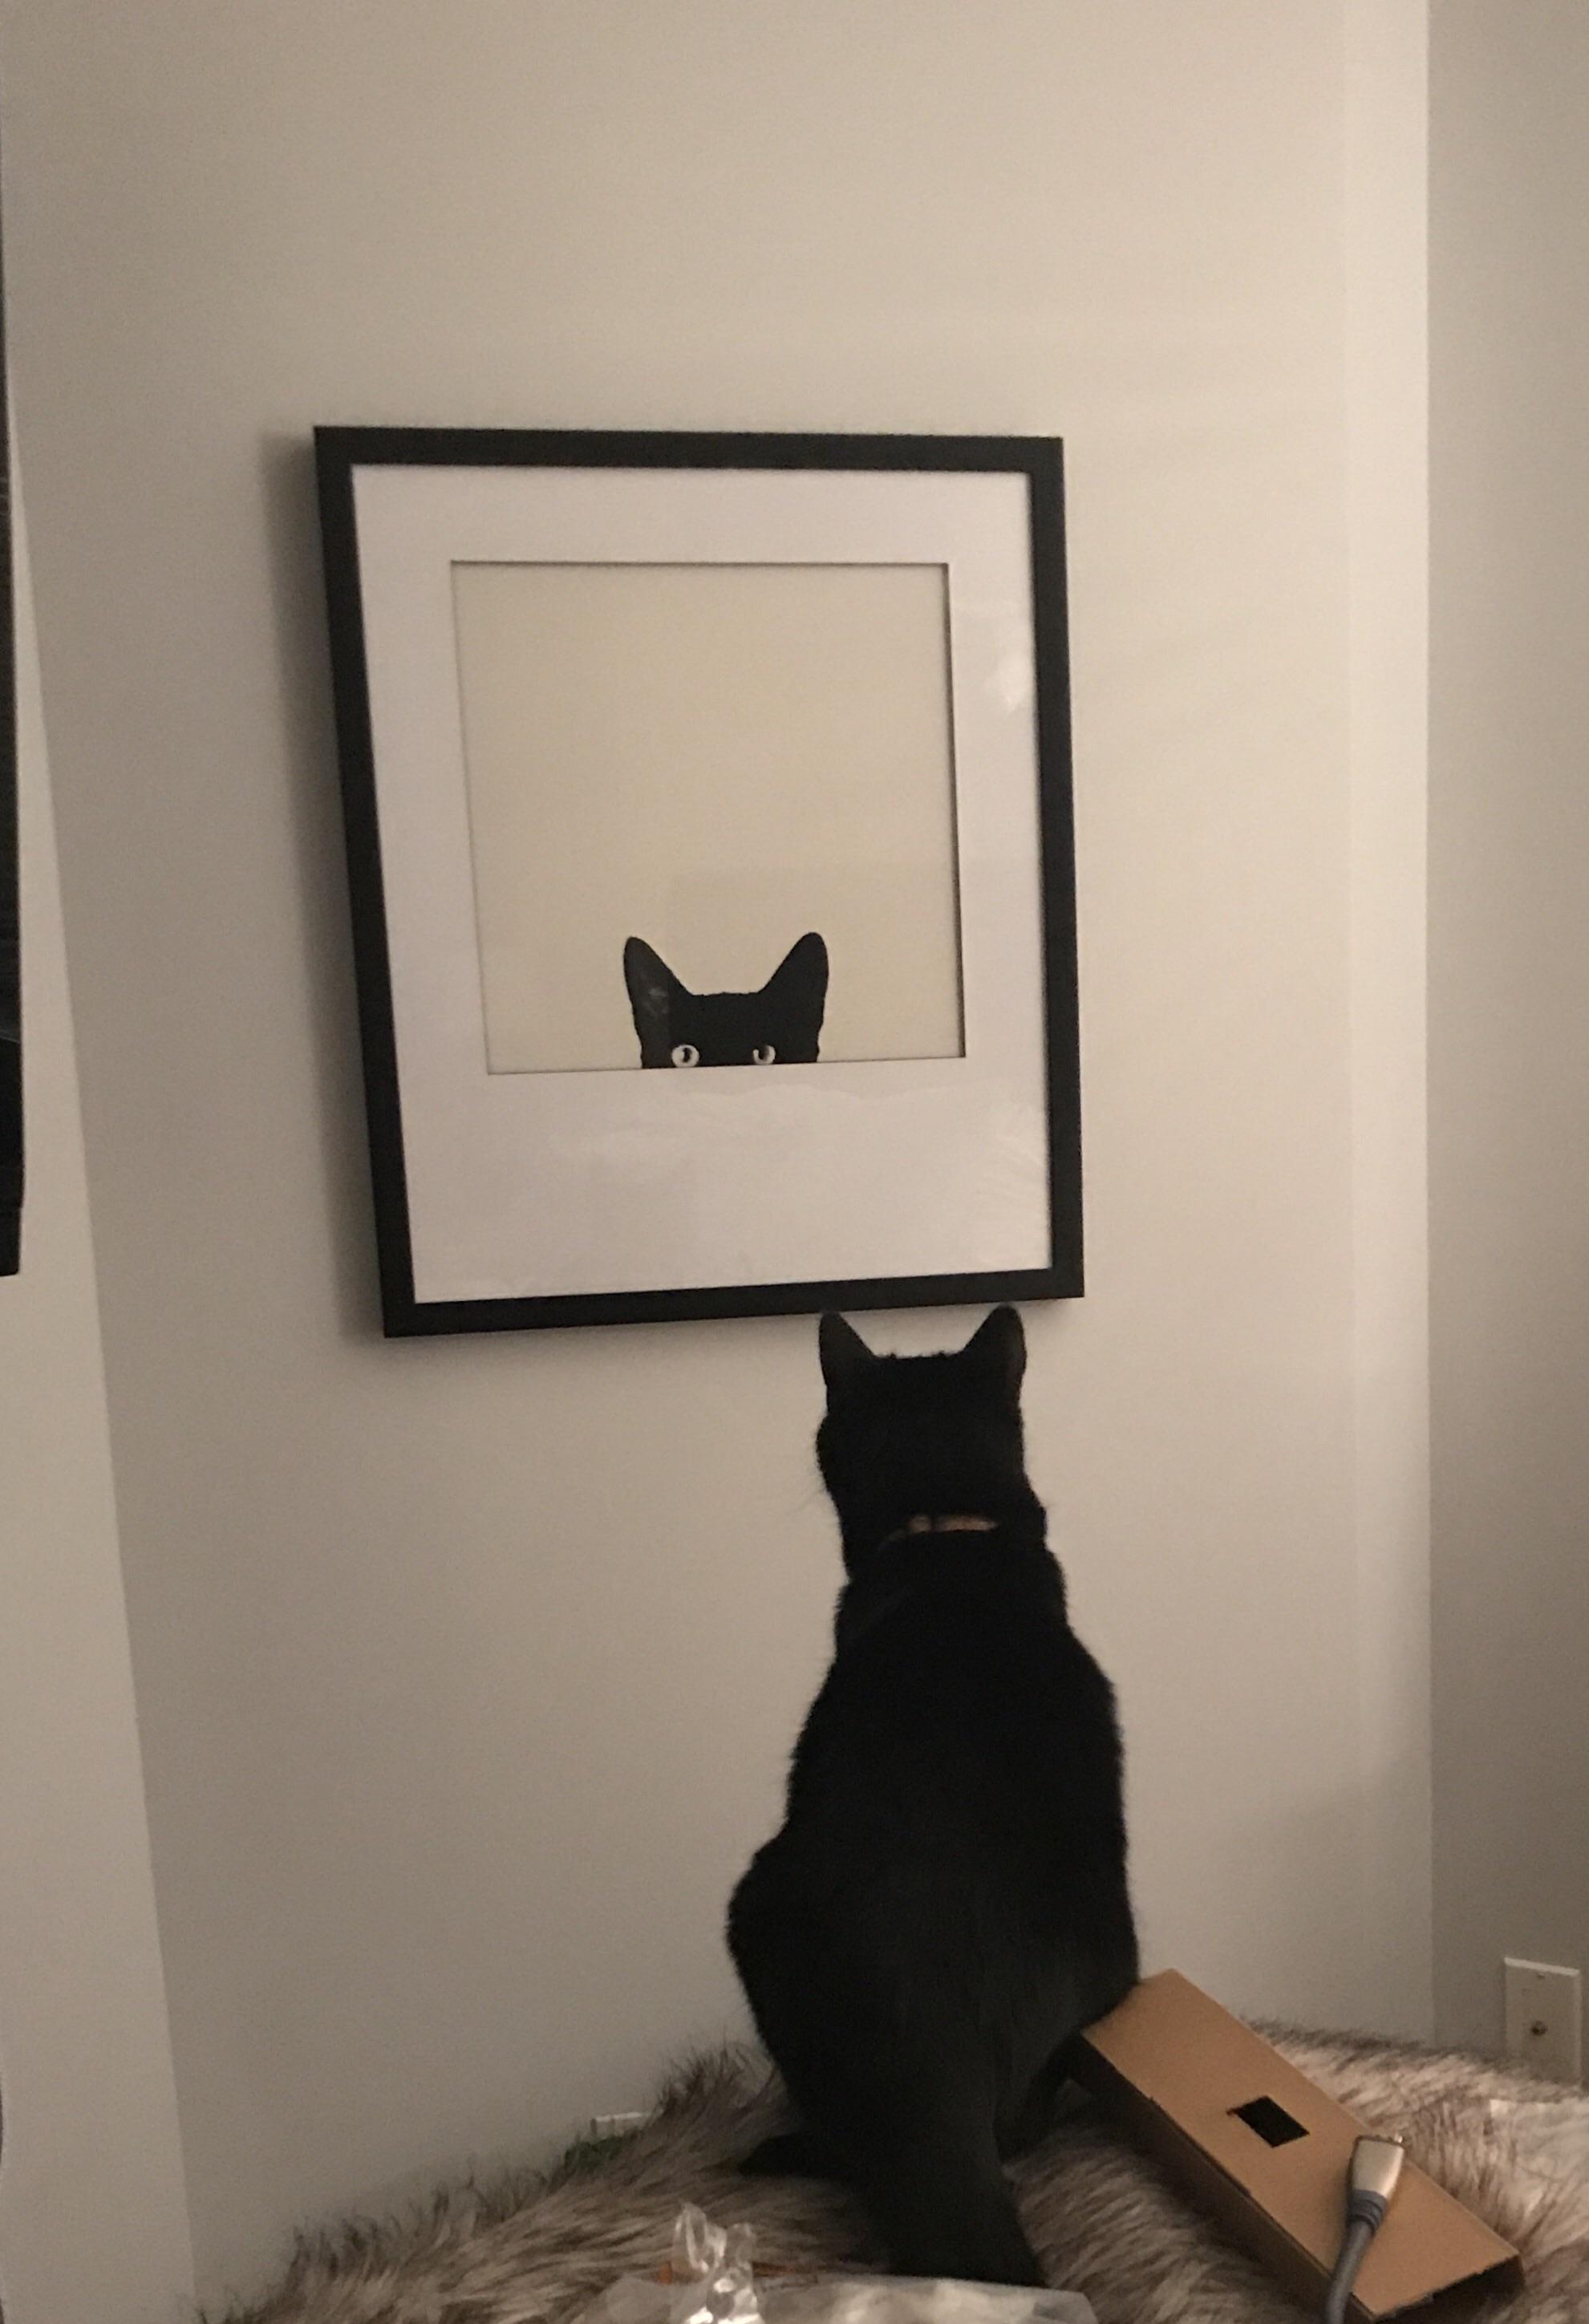 Our cat is very confused with our new picture.